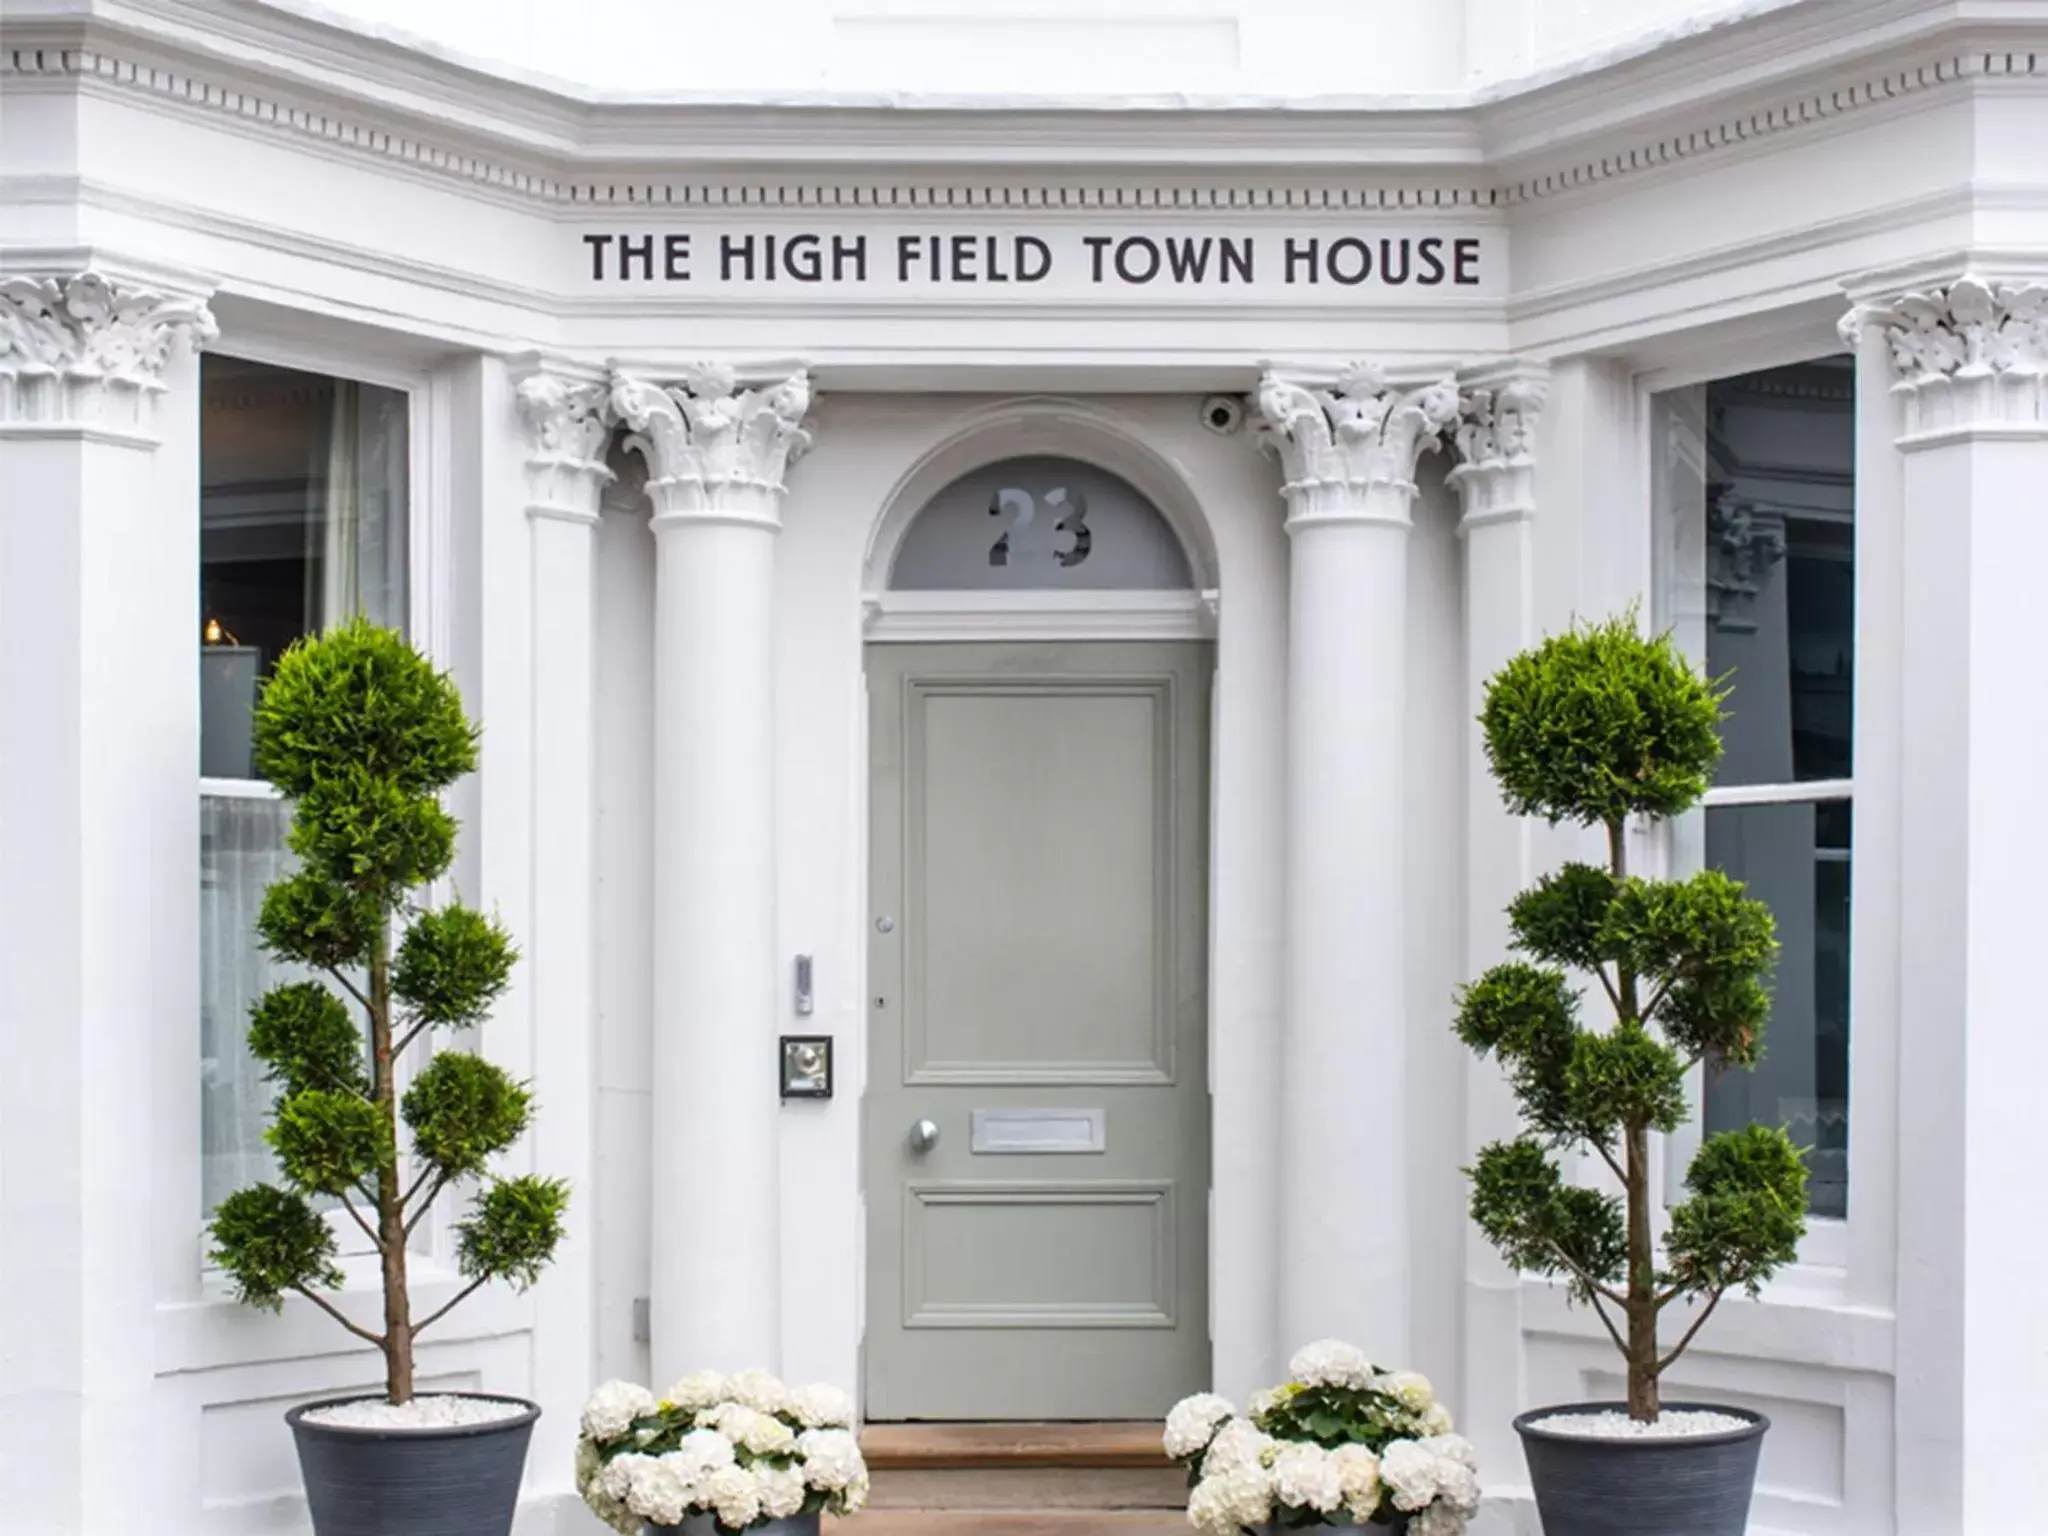 Facade/entrance in The High Field Town House